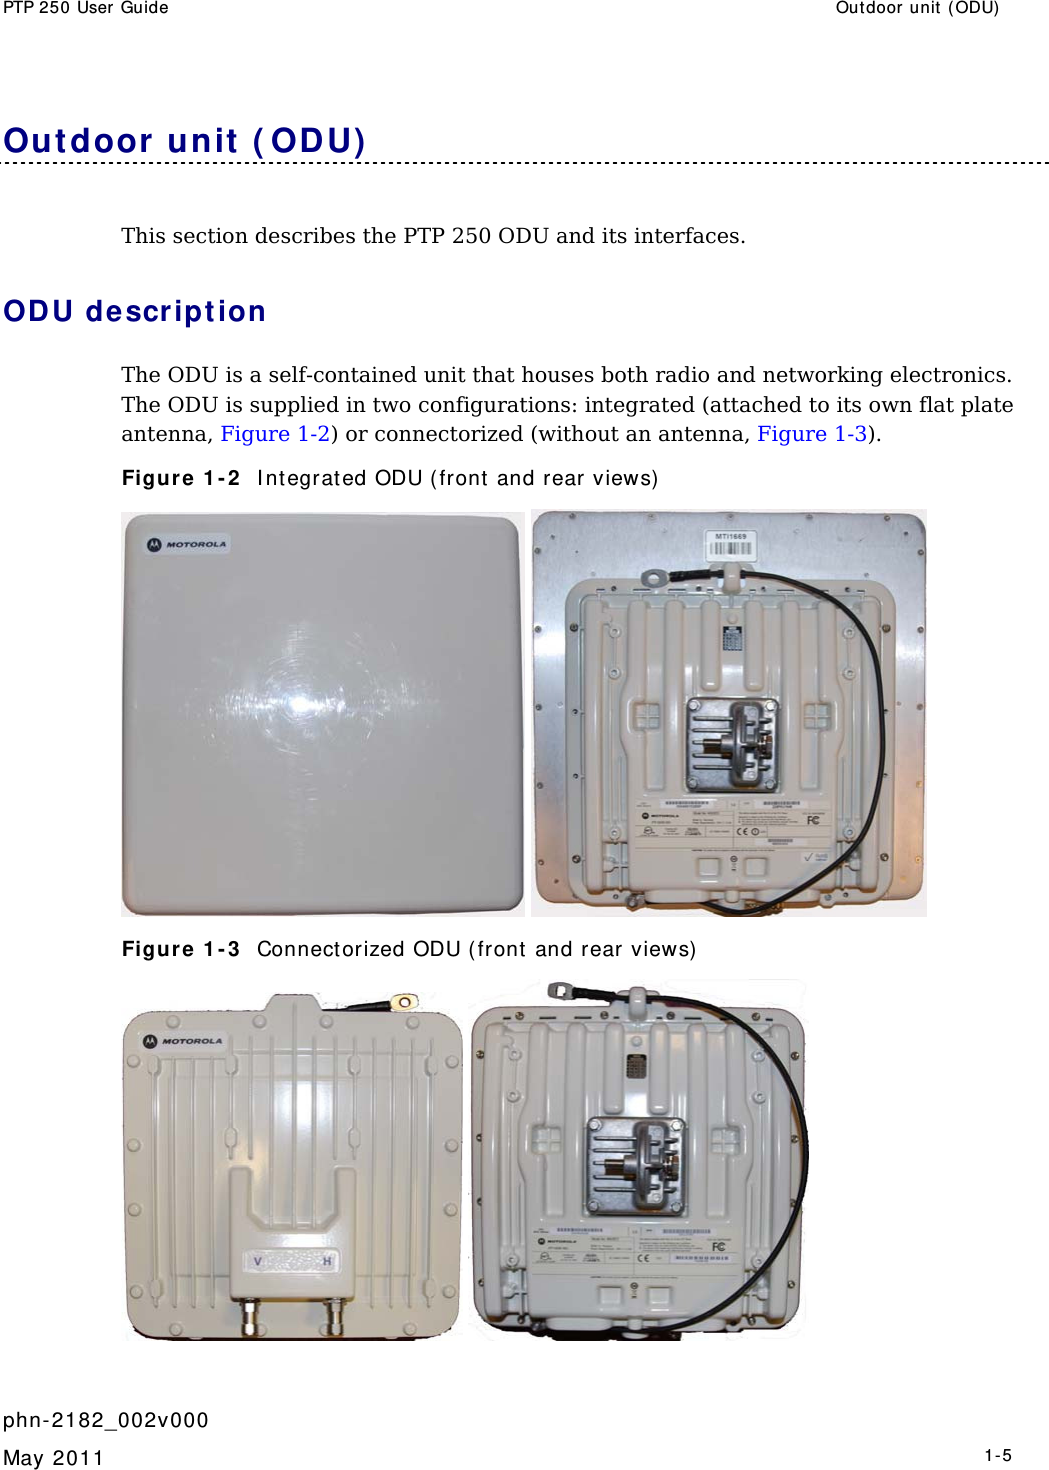 PTP 250 User Guide  Outdoor unit  ( ODU)    phn- 2182_002v000   May 2011   1-5  Out door  unit ( ODU)  This section describes the PTP 250 ODU and its interfaces. ODU descript ion The ODU is a self-contained unit that houses both radio and networking electronics. The ODU is supplied in two configurations: integrated (attached to its own flat plate antenna, Figure 1-2) or connectorized (without an antenna, Figure 1-3). Figure 1 - 2   I nt egrated ODU (front and rear views)   Figure 1 - 3   Connect orized ODU ( front  and rear views)    